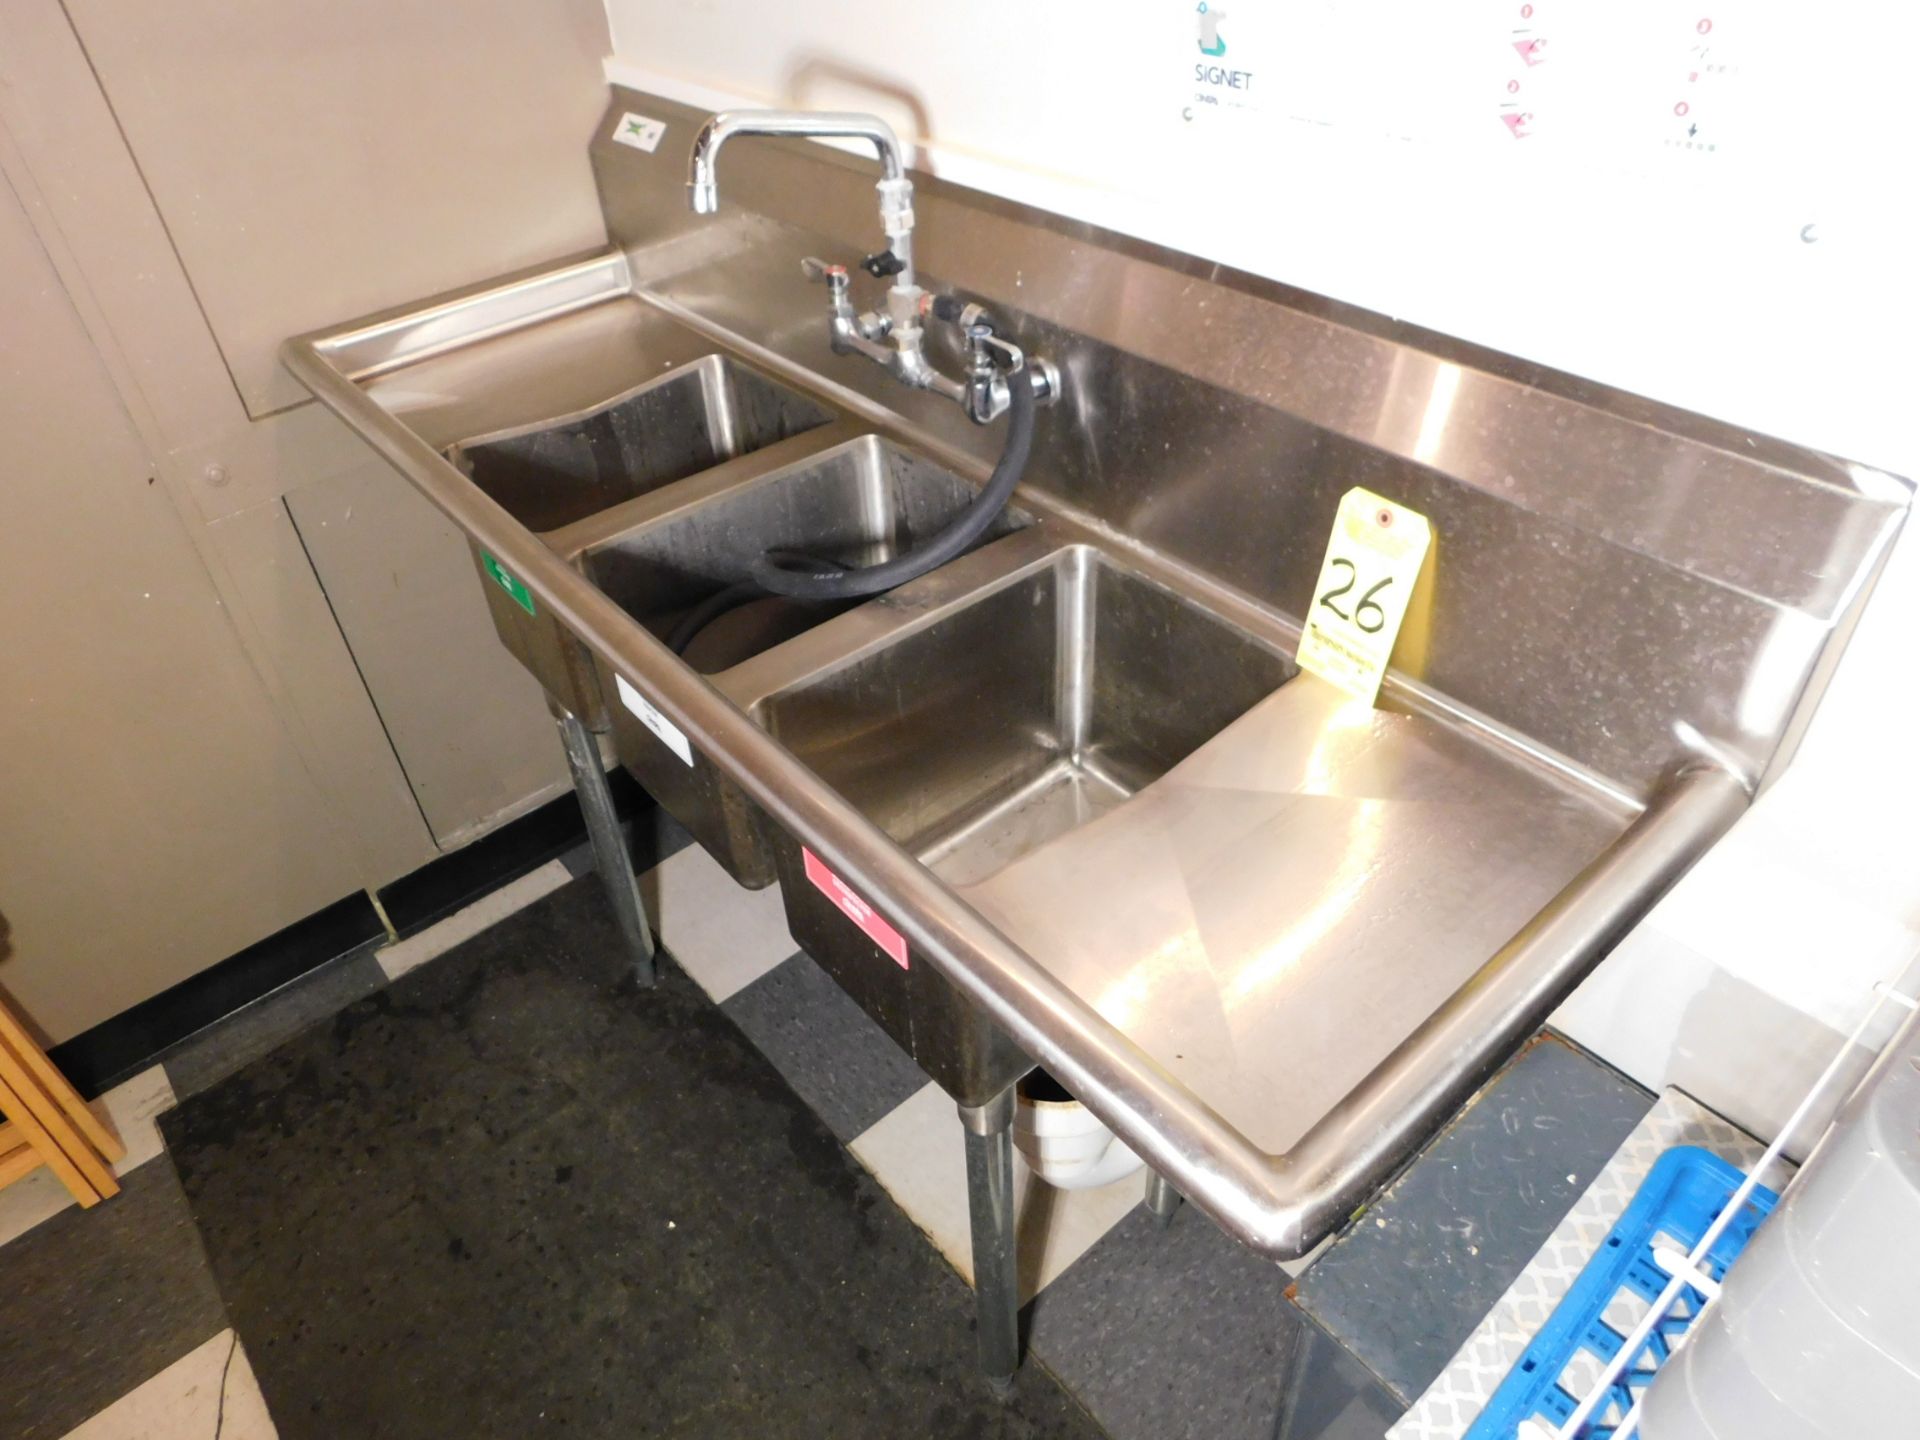 Three Bay Stainless Sink, 58" L x 20" W x 36" T, with Faucets and Hoses